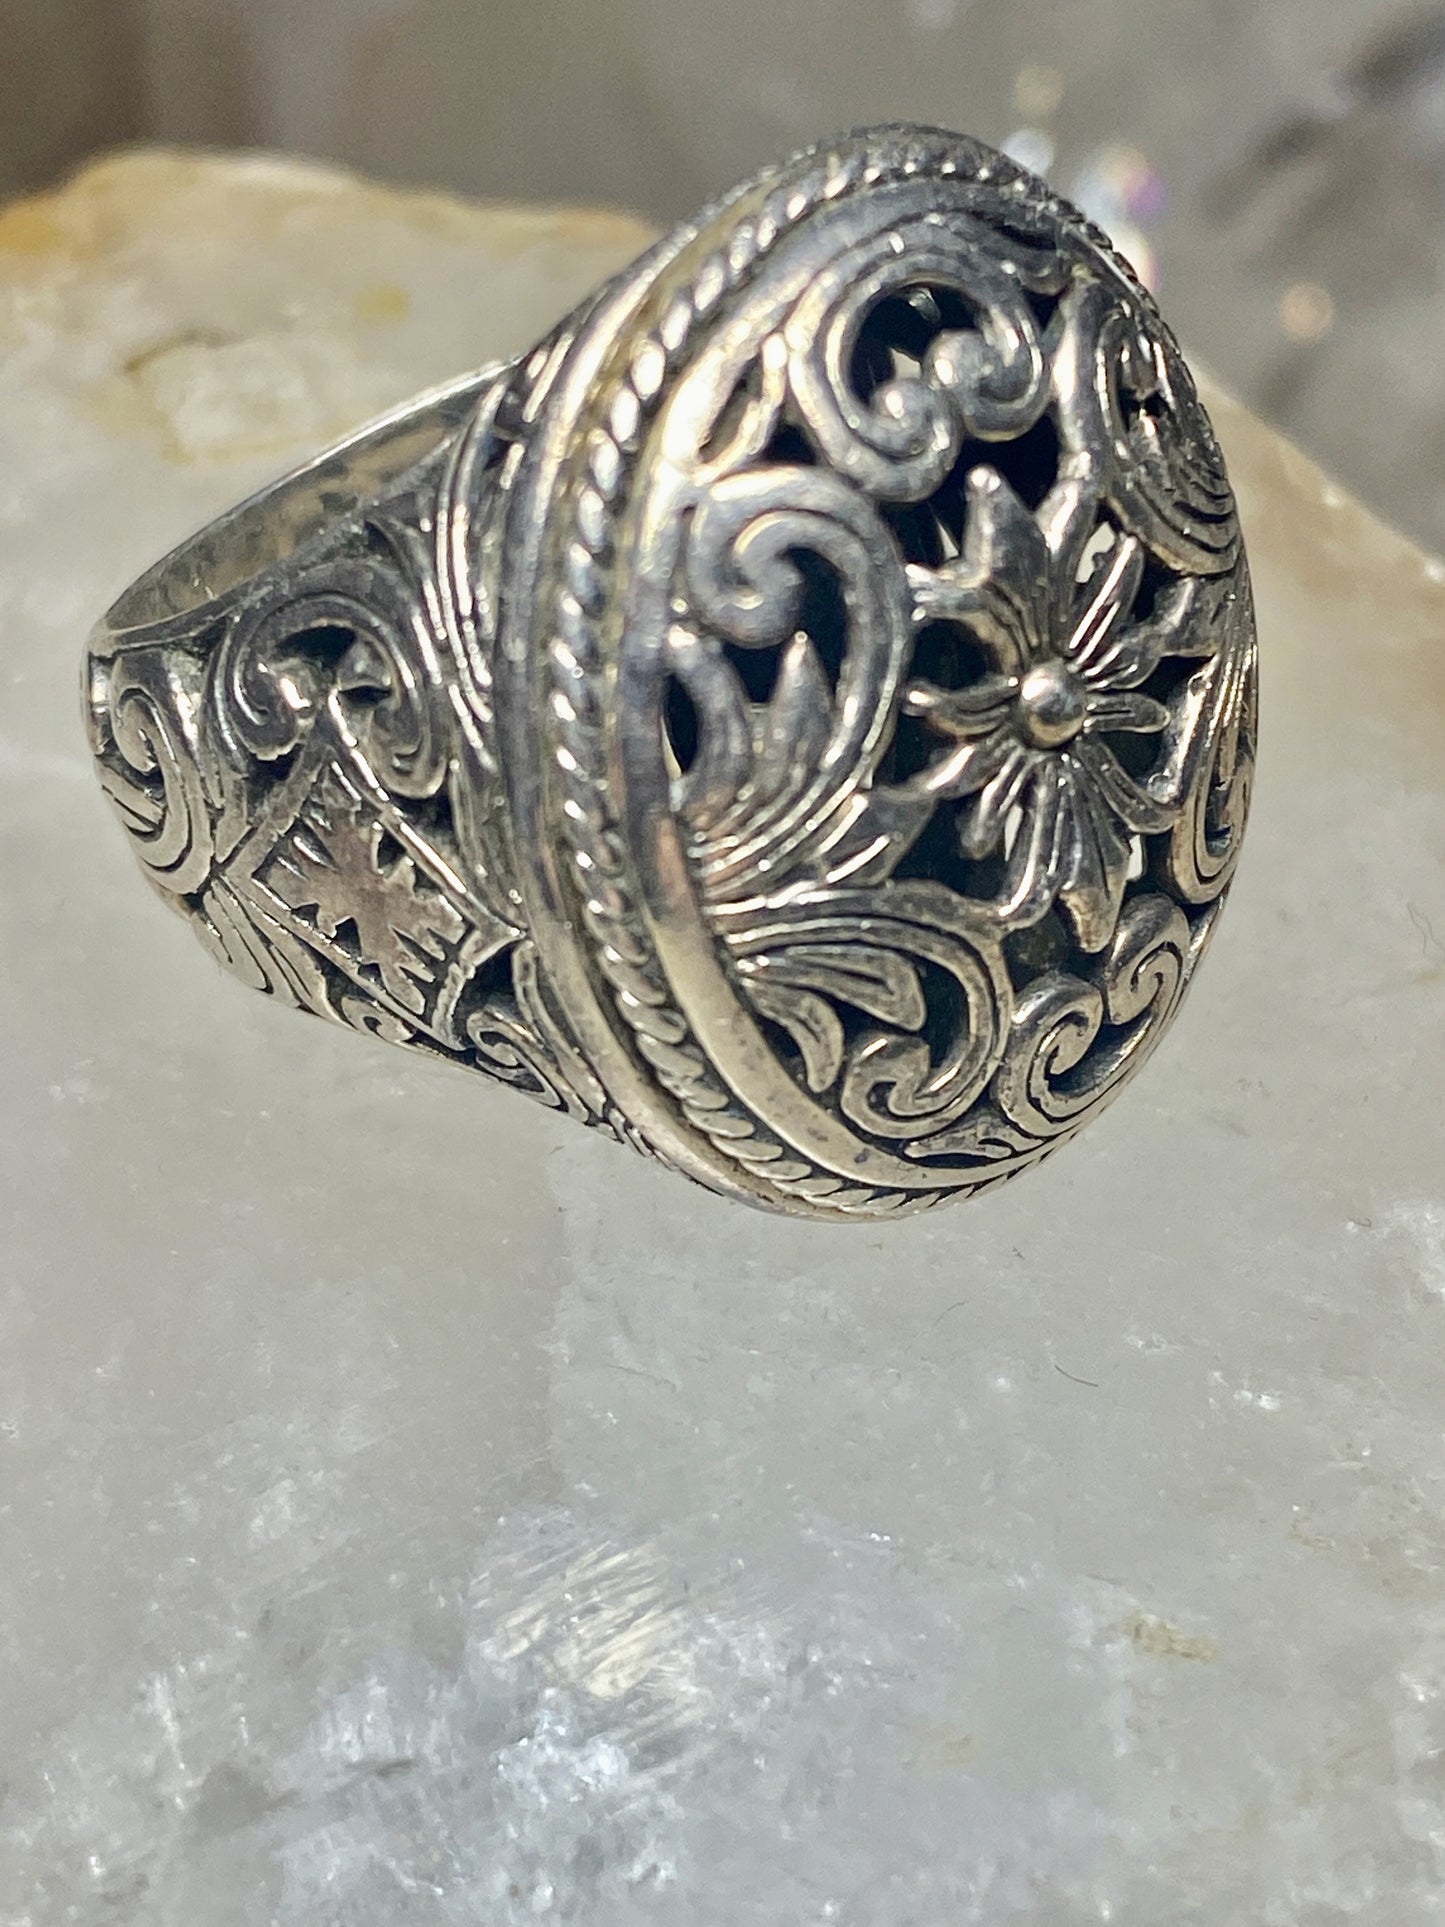 Floral ring size 5.50 geometric detailed ornate sterling silver pinky